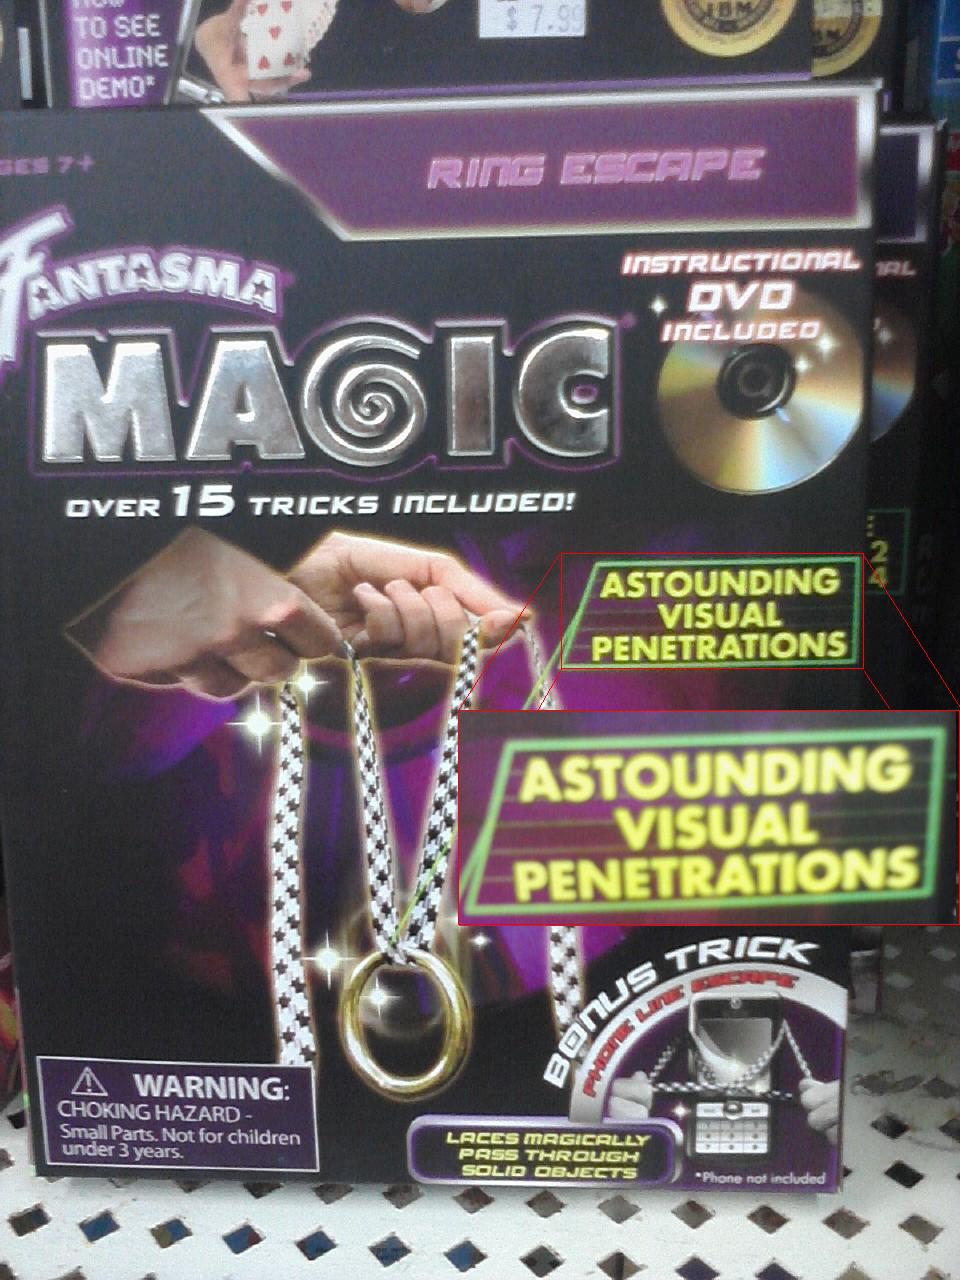 I found this at K Mart and thought it was worth posting. I want "Amazing Visual Penetrations" every time. 